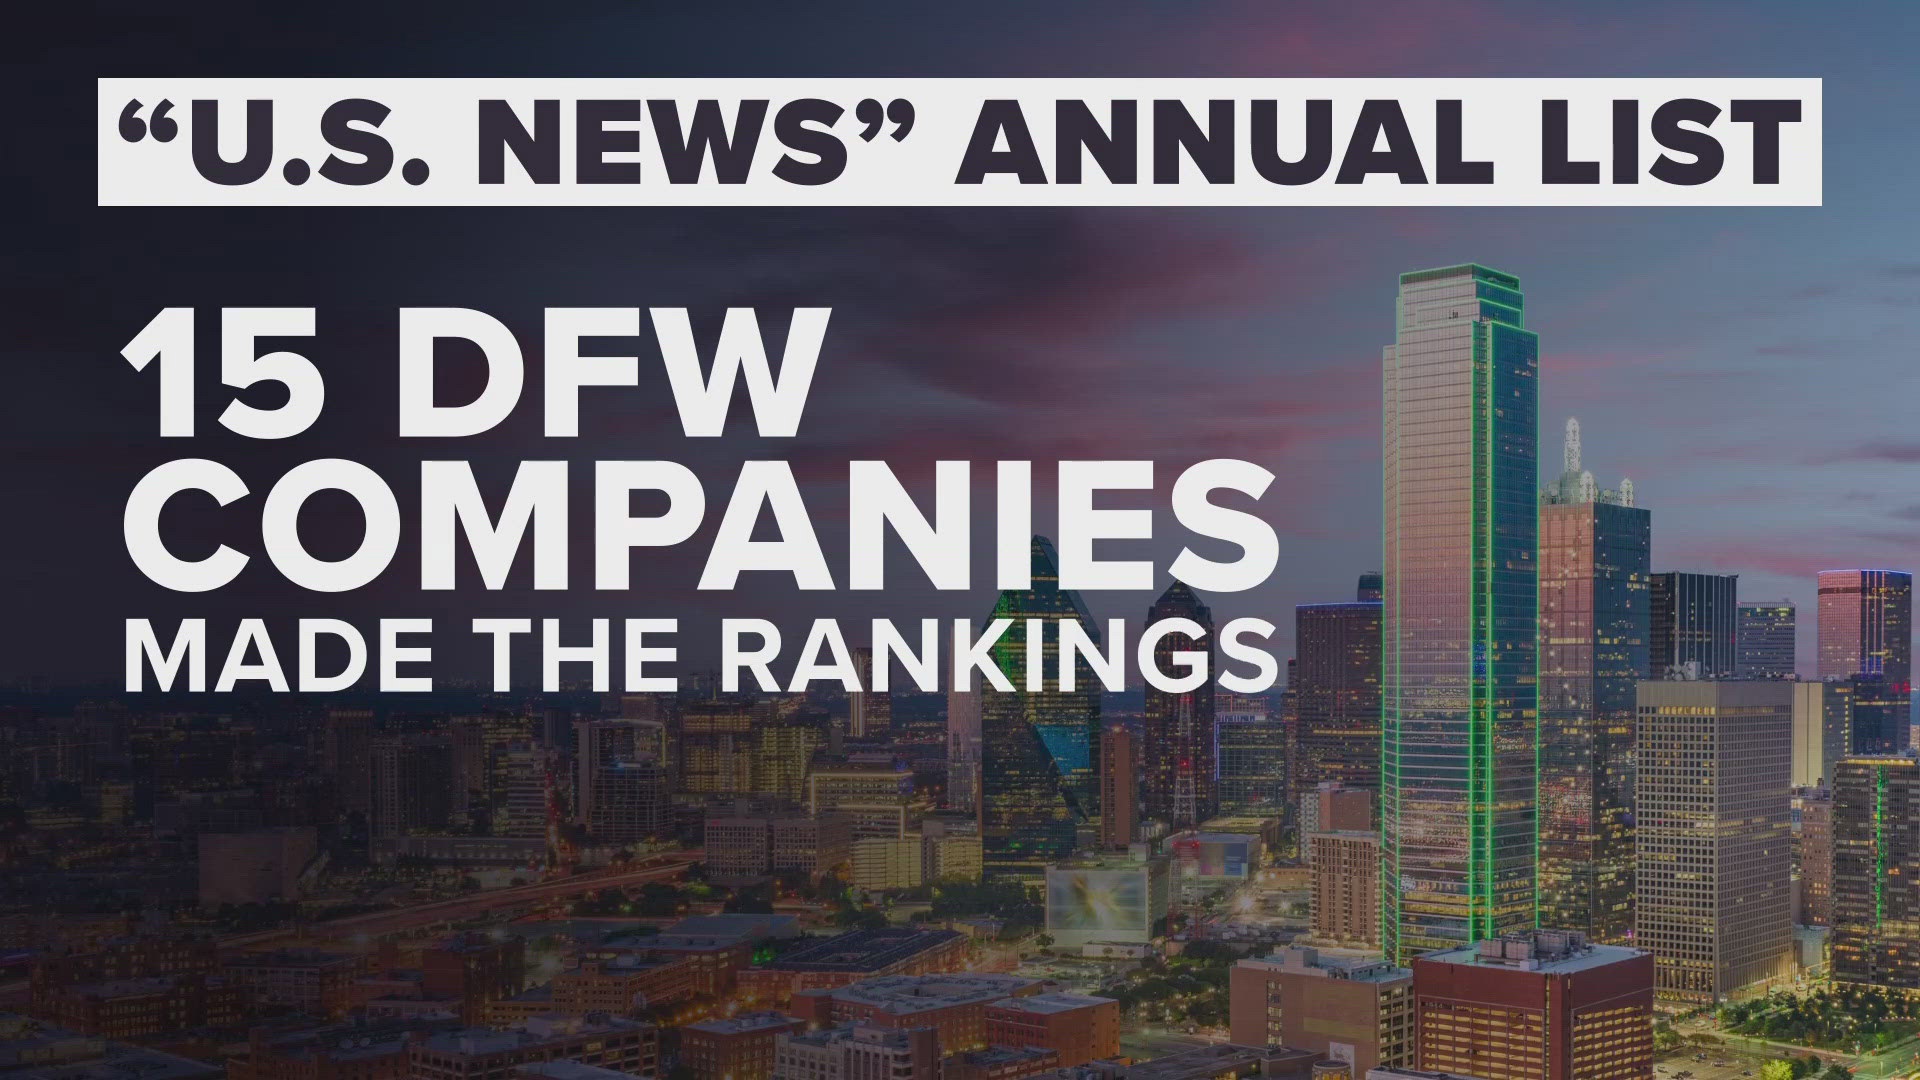 Dallas had the most of any local city with five companies listed.